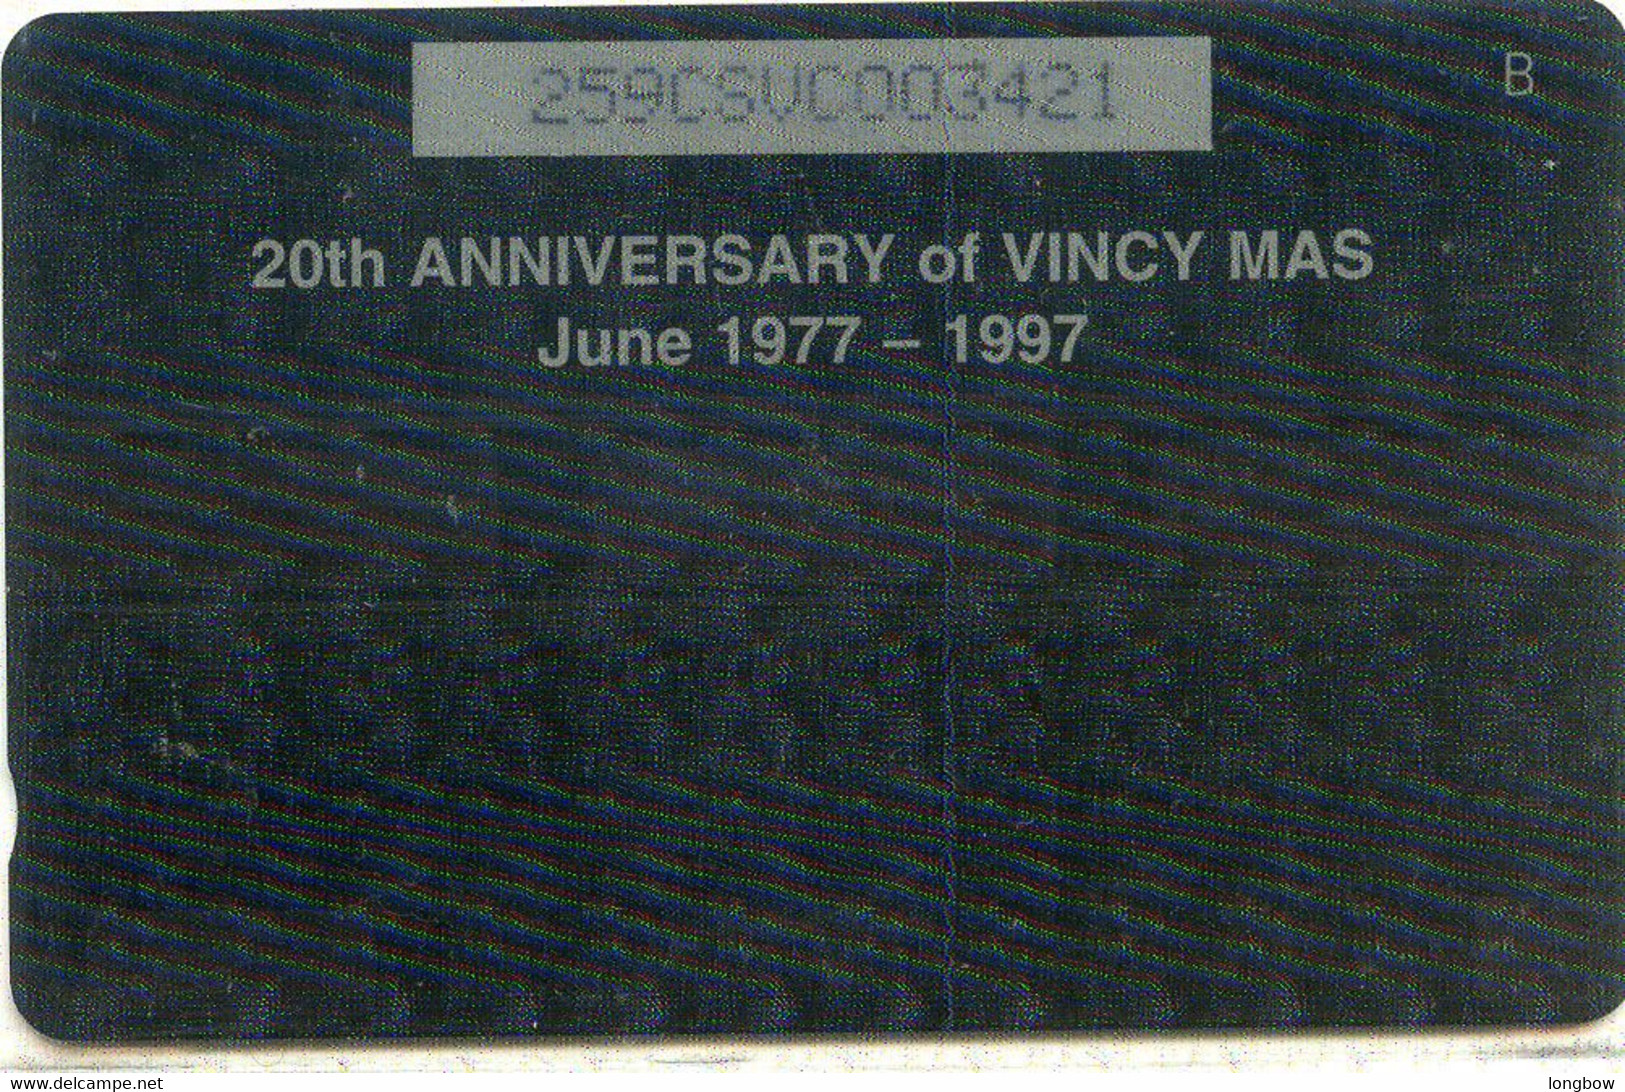 ST.VINCENT & THE GRENADINES-259CSVC-ANNIVERSARY OF VINCY MAS - St. Vincent & The Grenadines